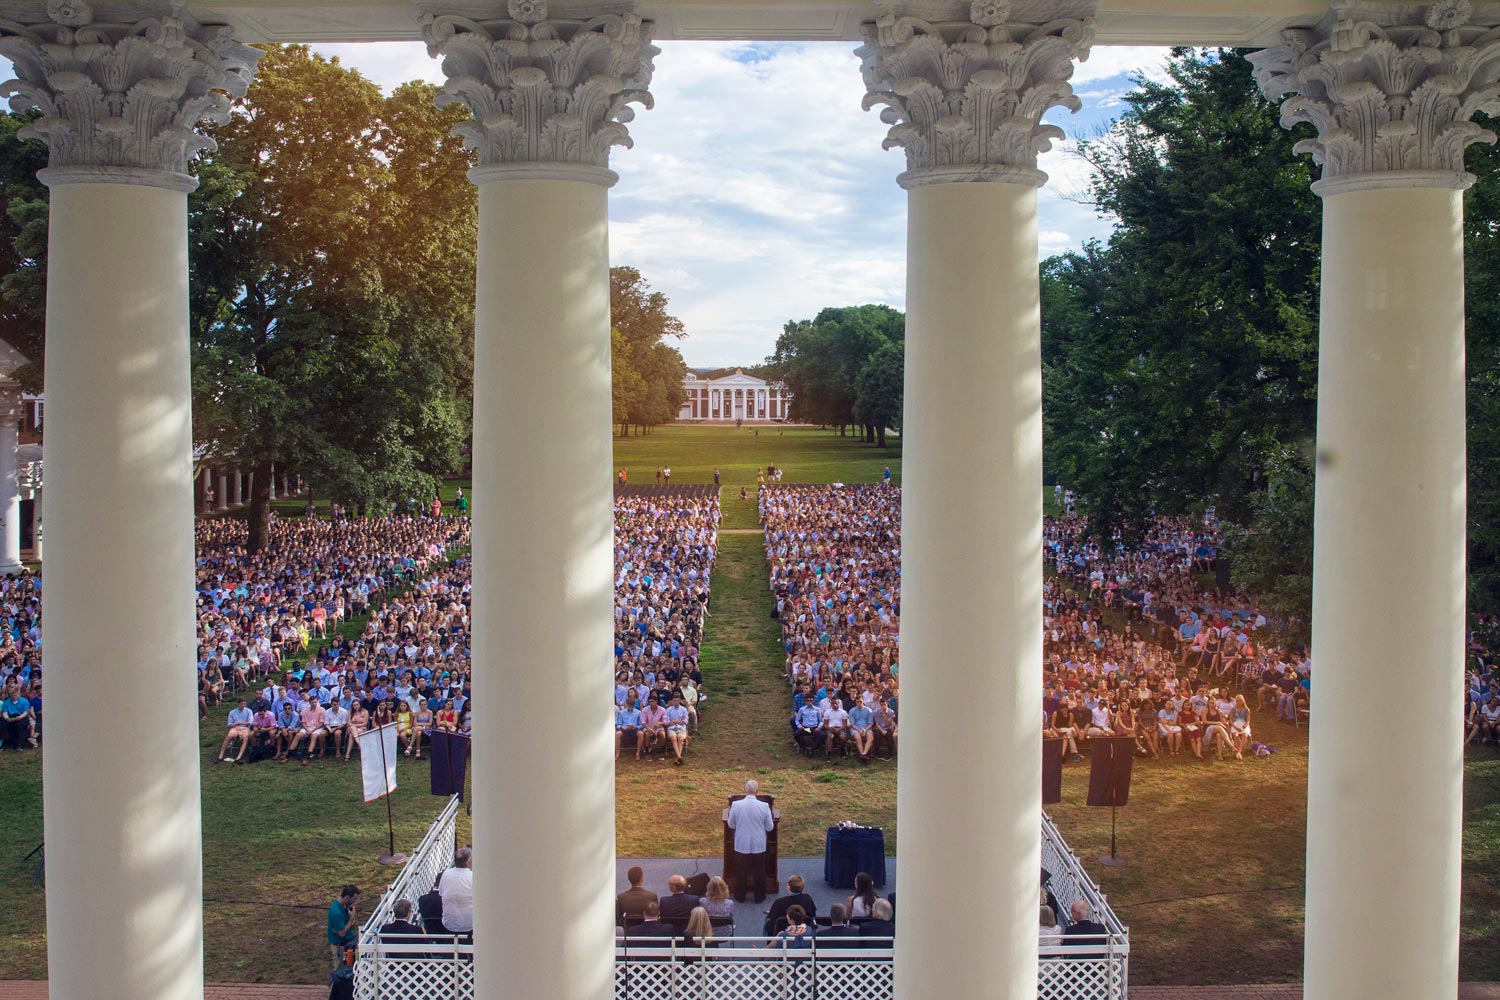 Man speaking at a podium to a crowd of students sitting on the lawn in chairs